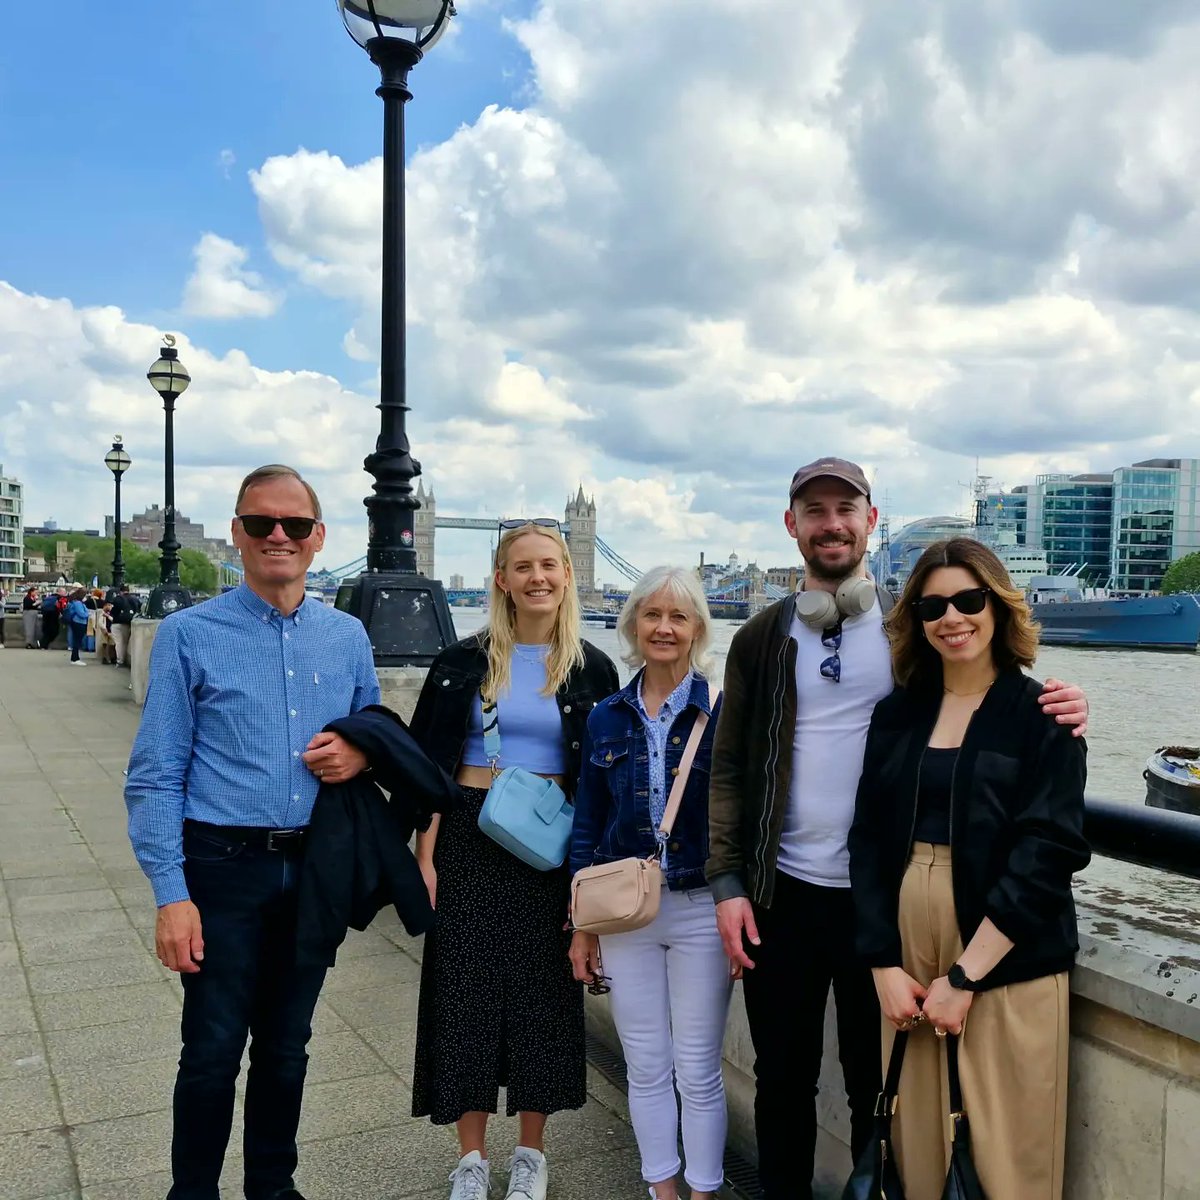 A private tour along the north bank of the Thames for this lovely family group this morning. A Christmas present- using a @Guided_Walks gift voucher- but they waited for better weather & luckily the sun shone 🌞🌞🌞🌞
#privatetour #river #thames #cityoflondon #visitthecity